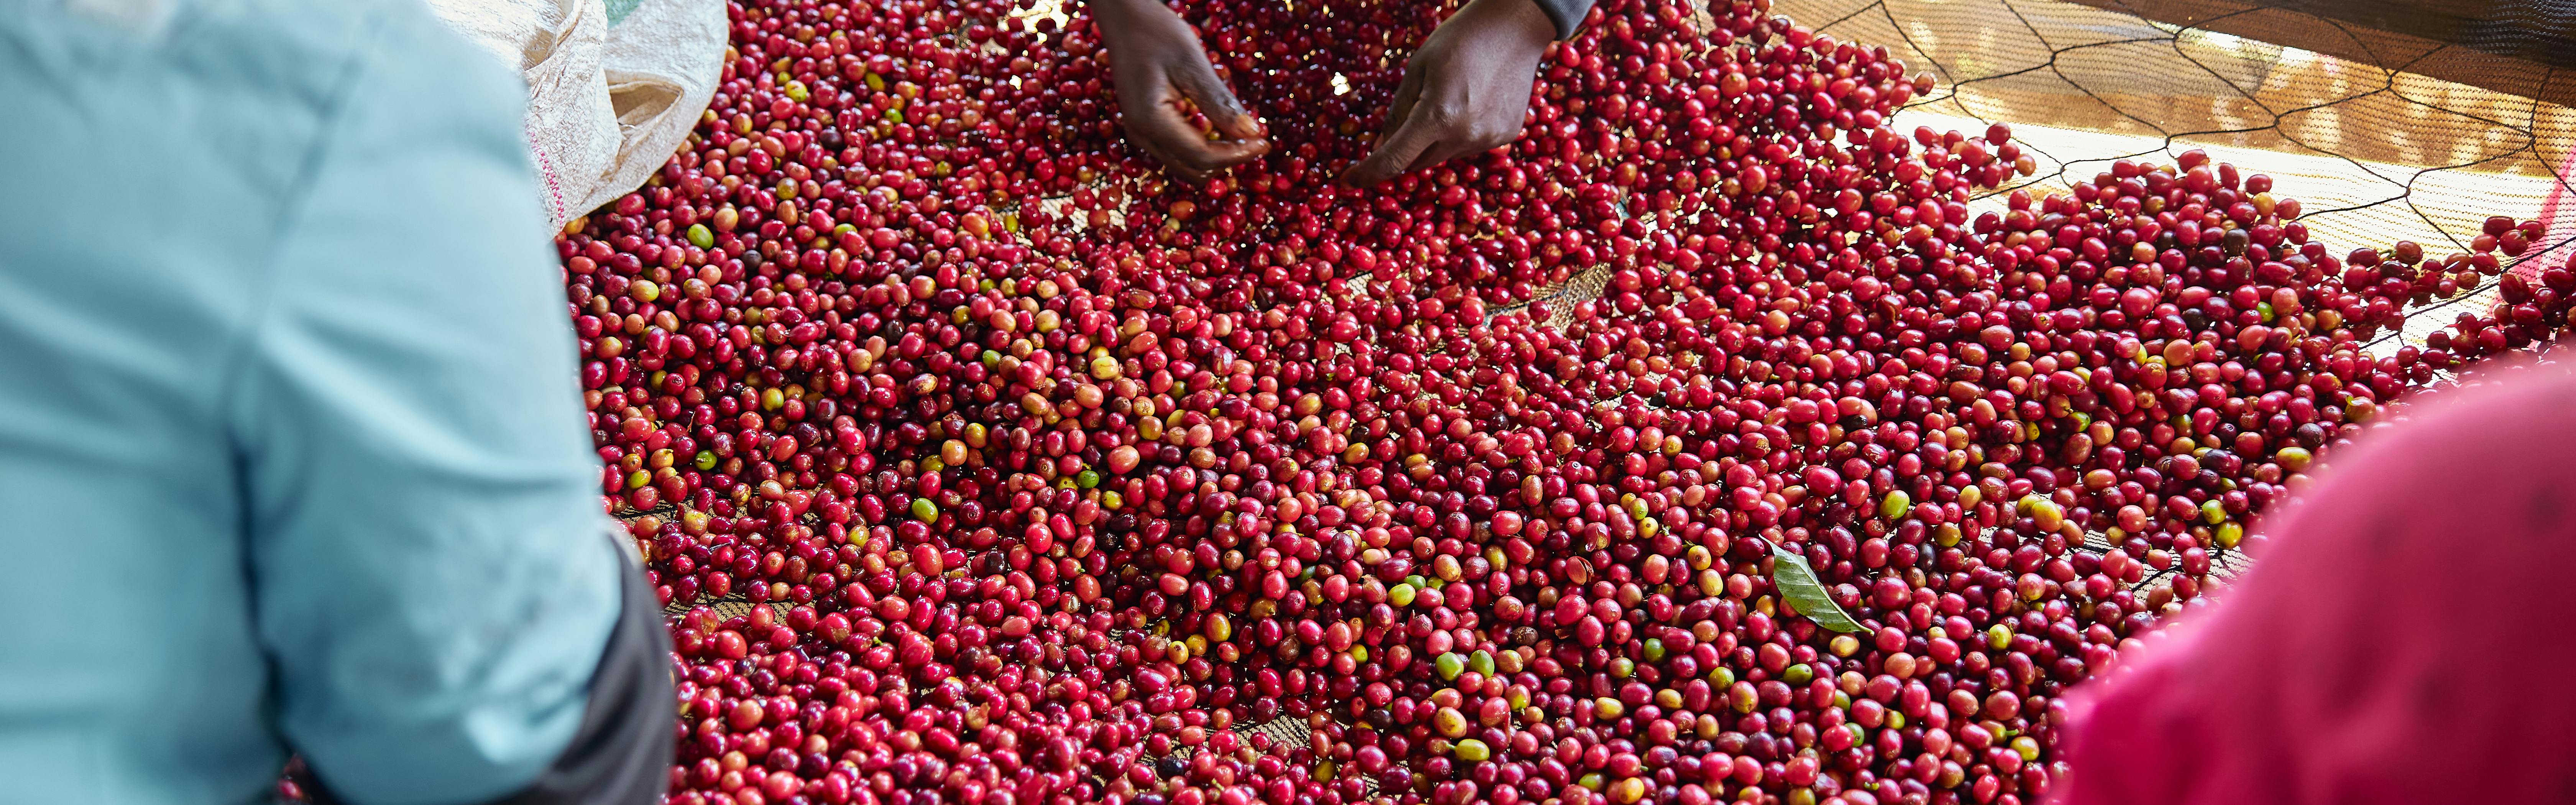 Red coffee beans as they are sorted on a mat. 